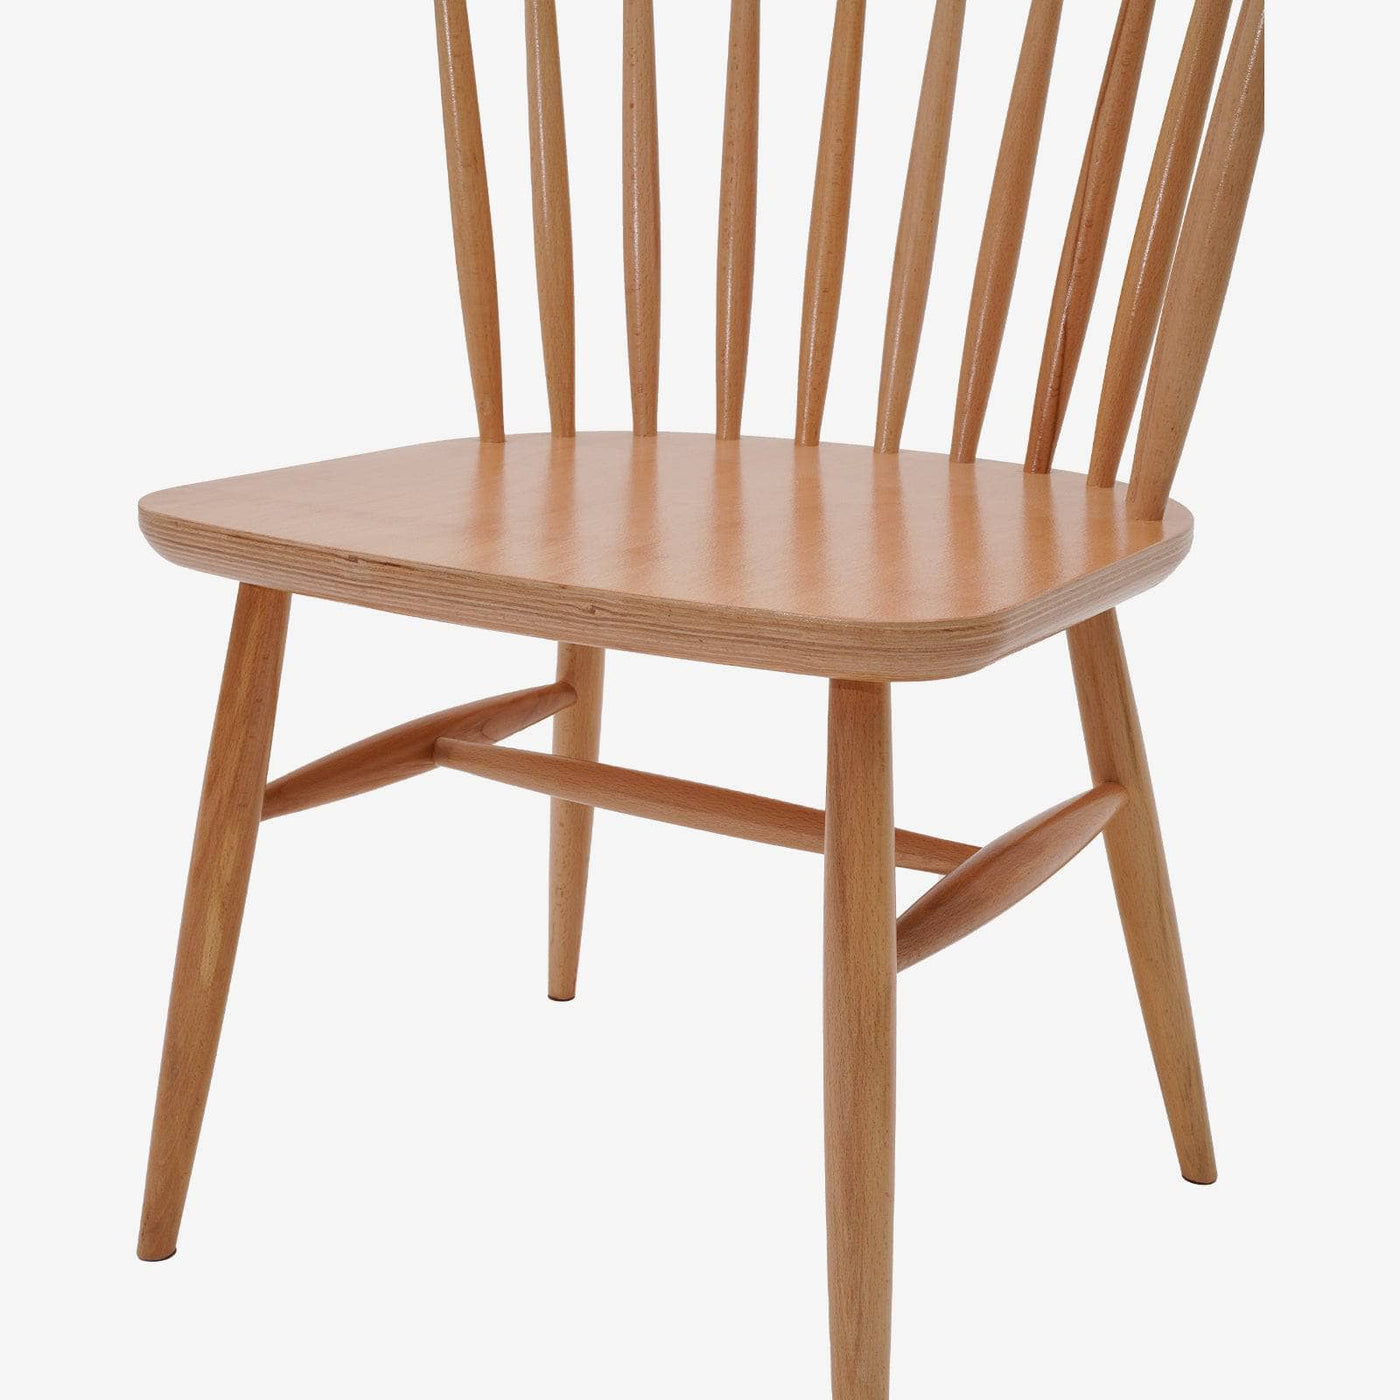 Beecher Curved Back Dining Chair, Wood - 4